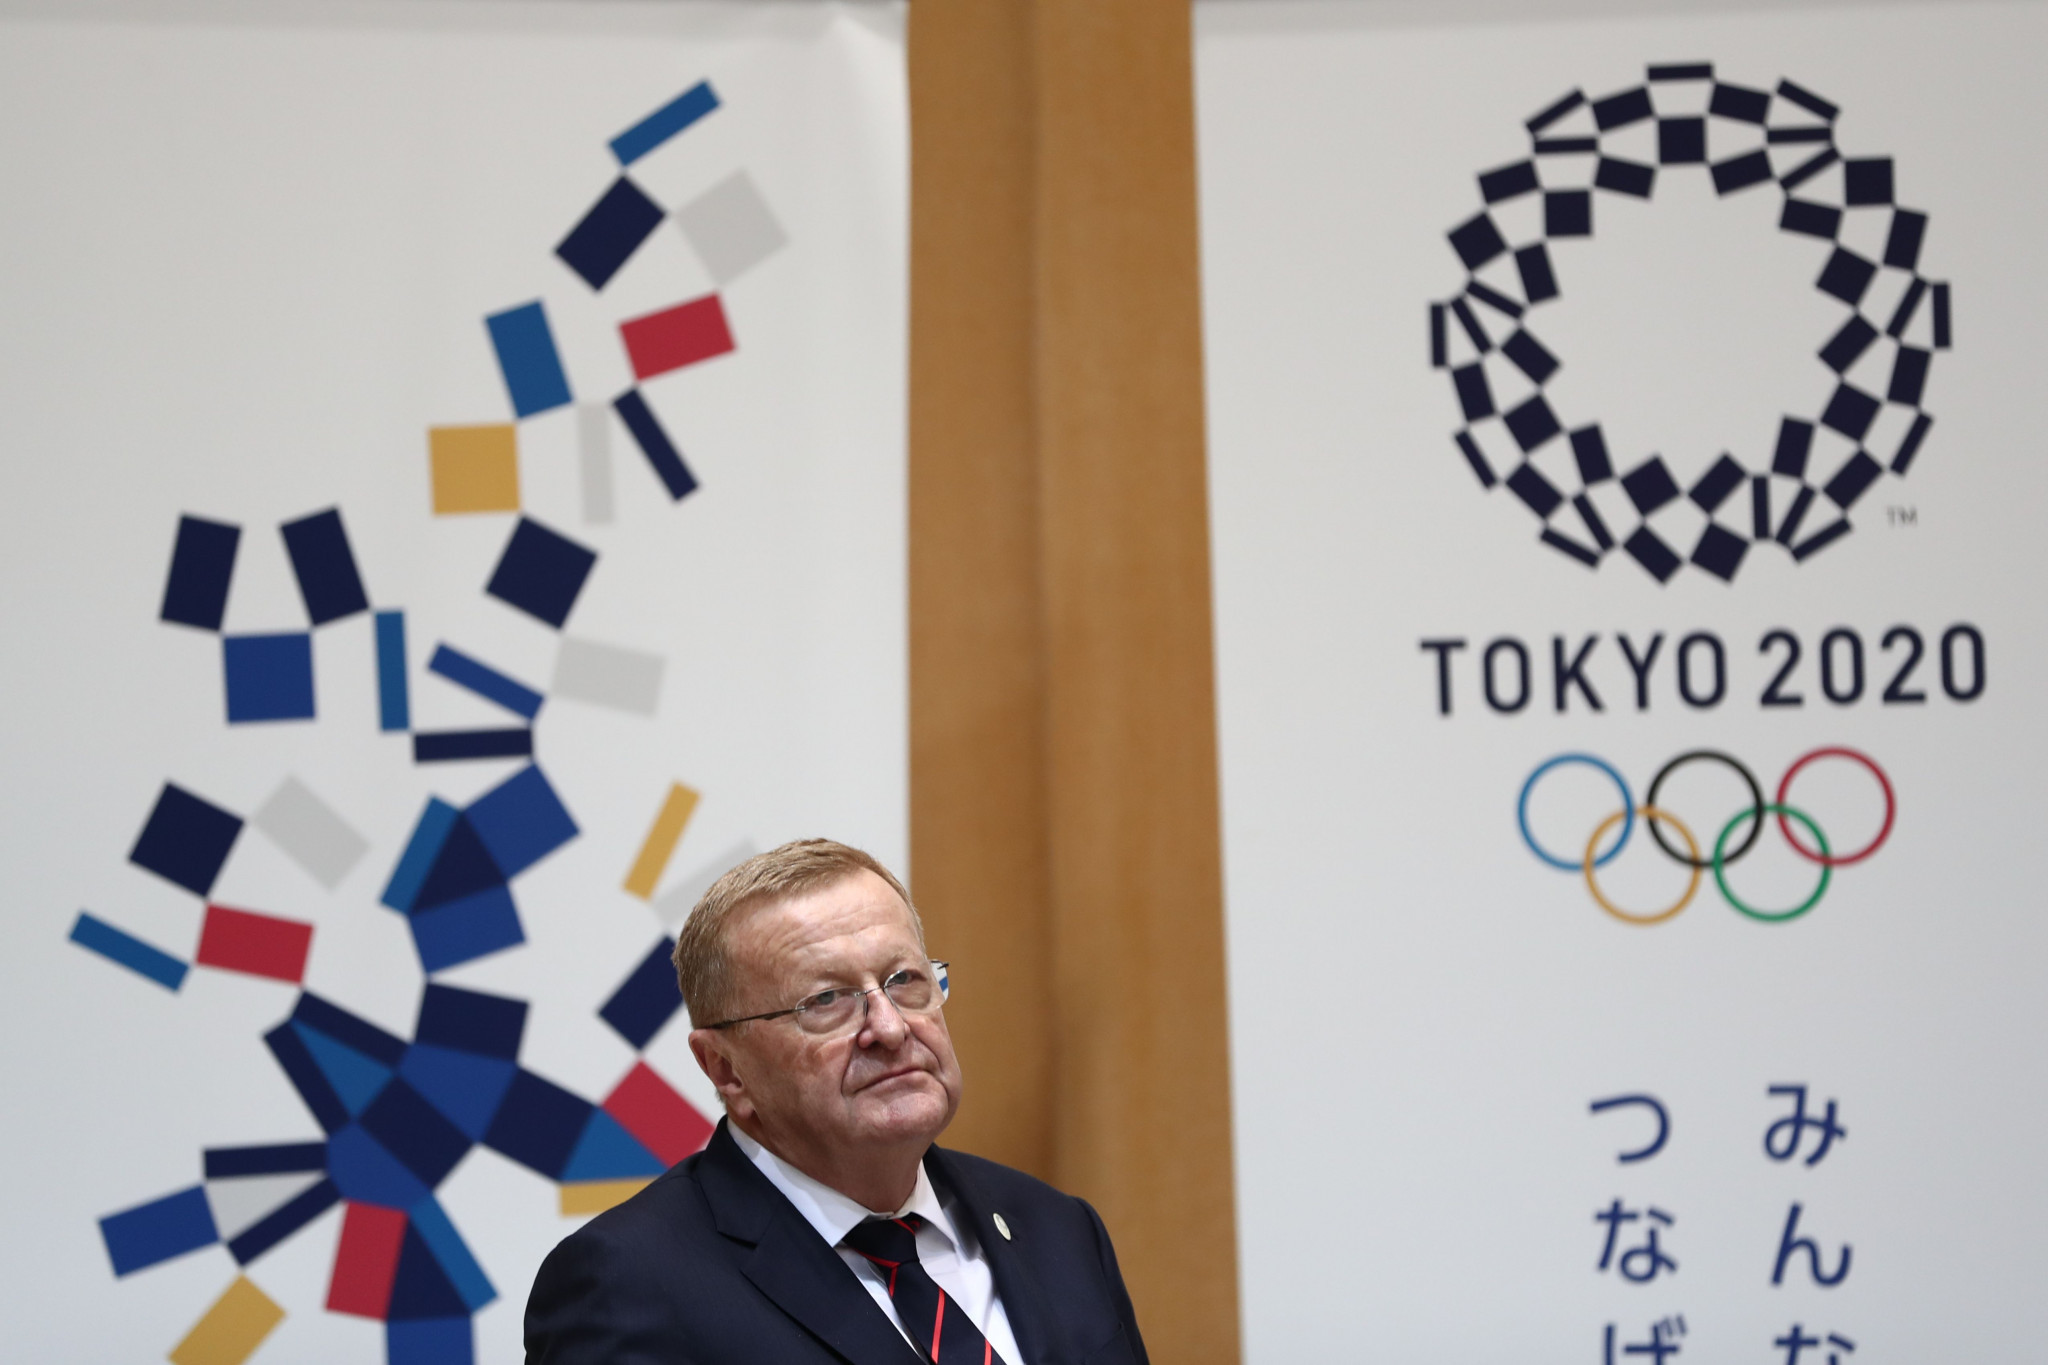 Coates claims Tokyo 2020 will go ahead next year with or without COVID-19